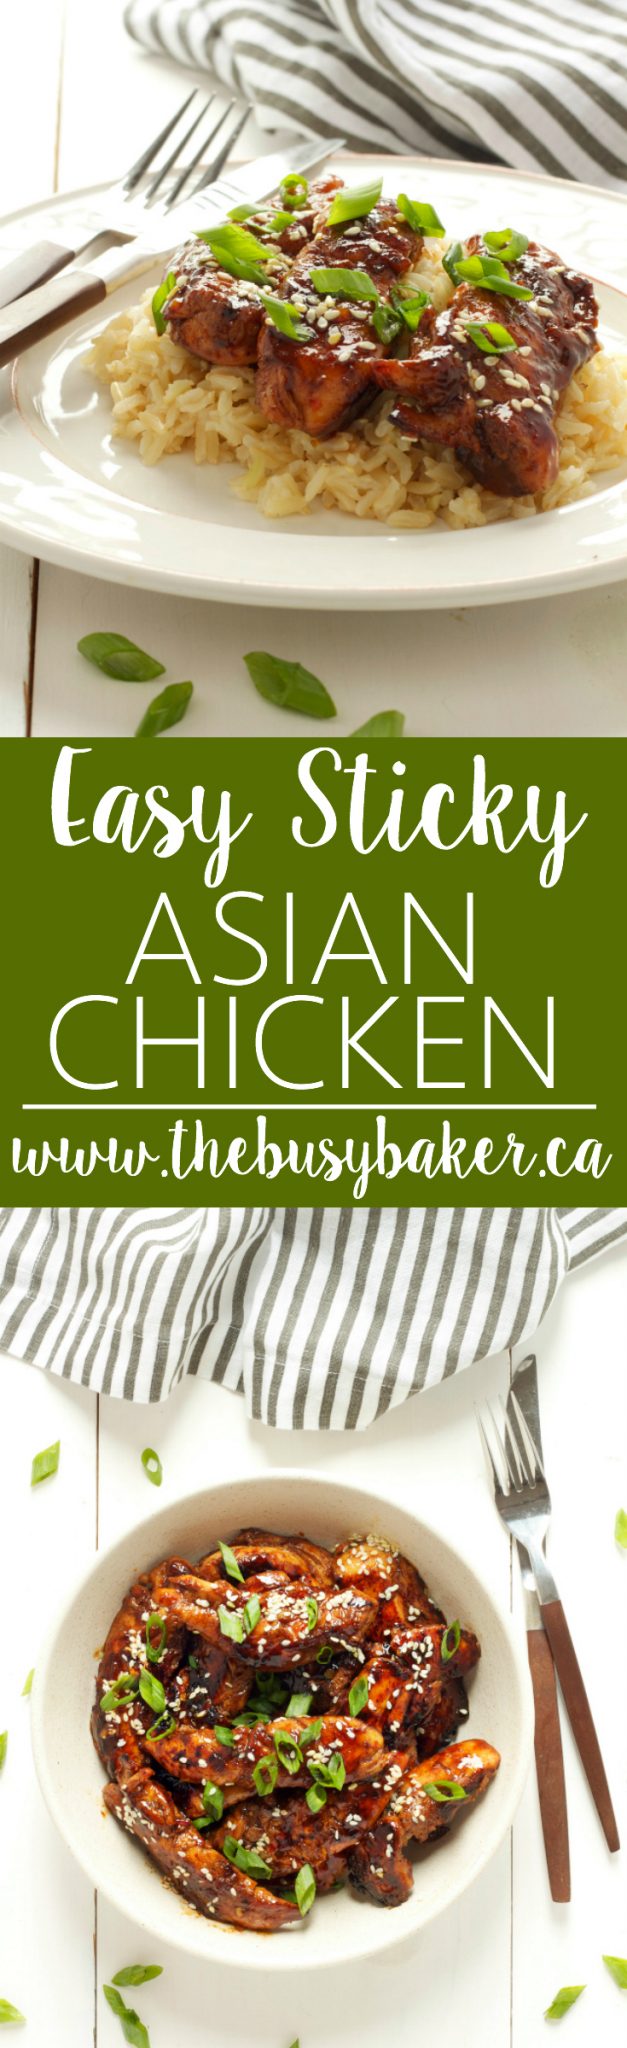 This Easy Sticky Asian Chicken tastes better than take-out, and it's the perfect easy Asian-inspired recipe to make at home with simple ingredients! thebusybaker.ca via @busybakerblog